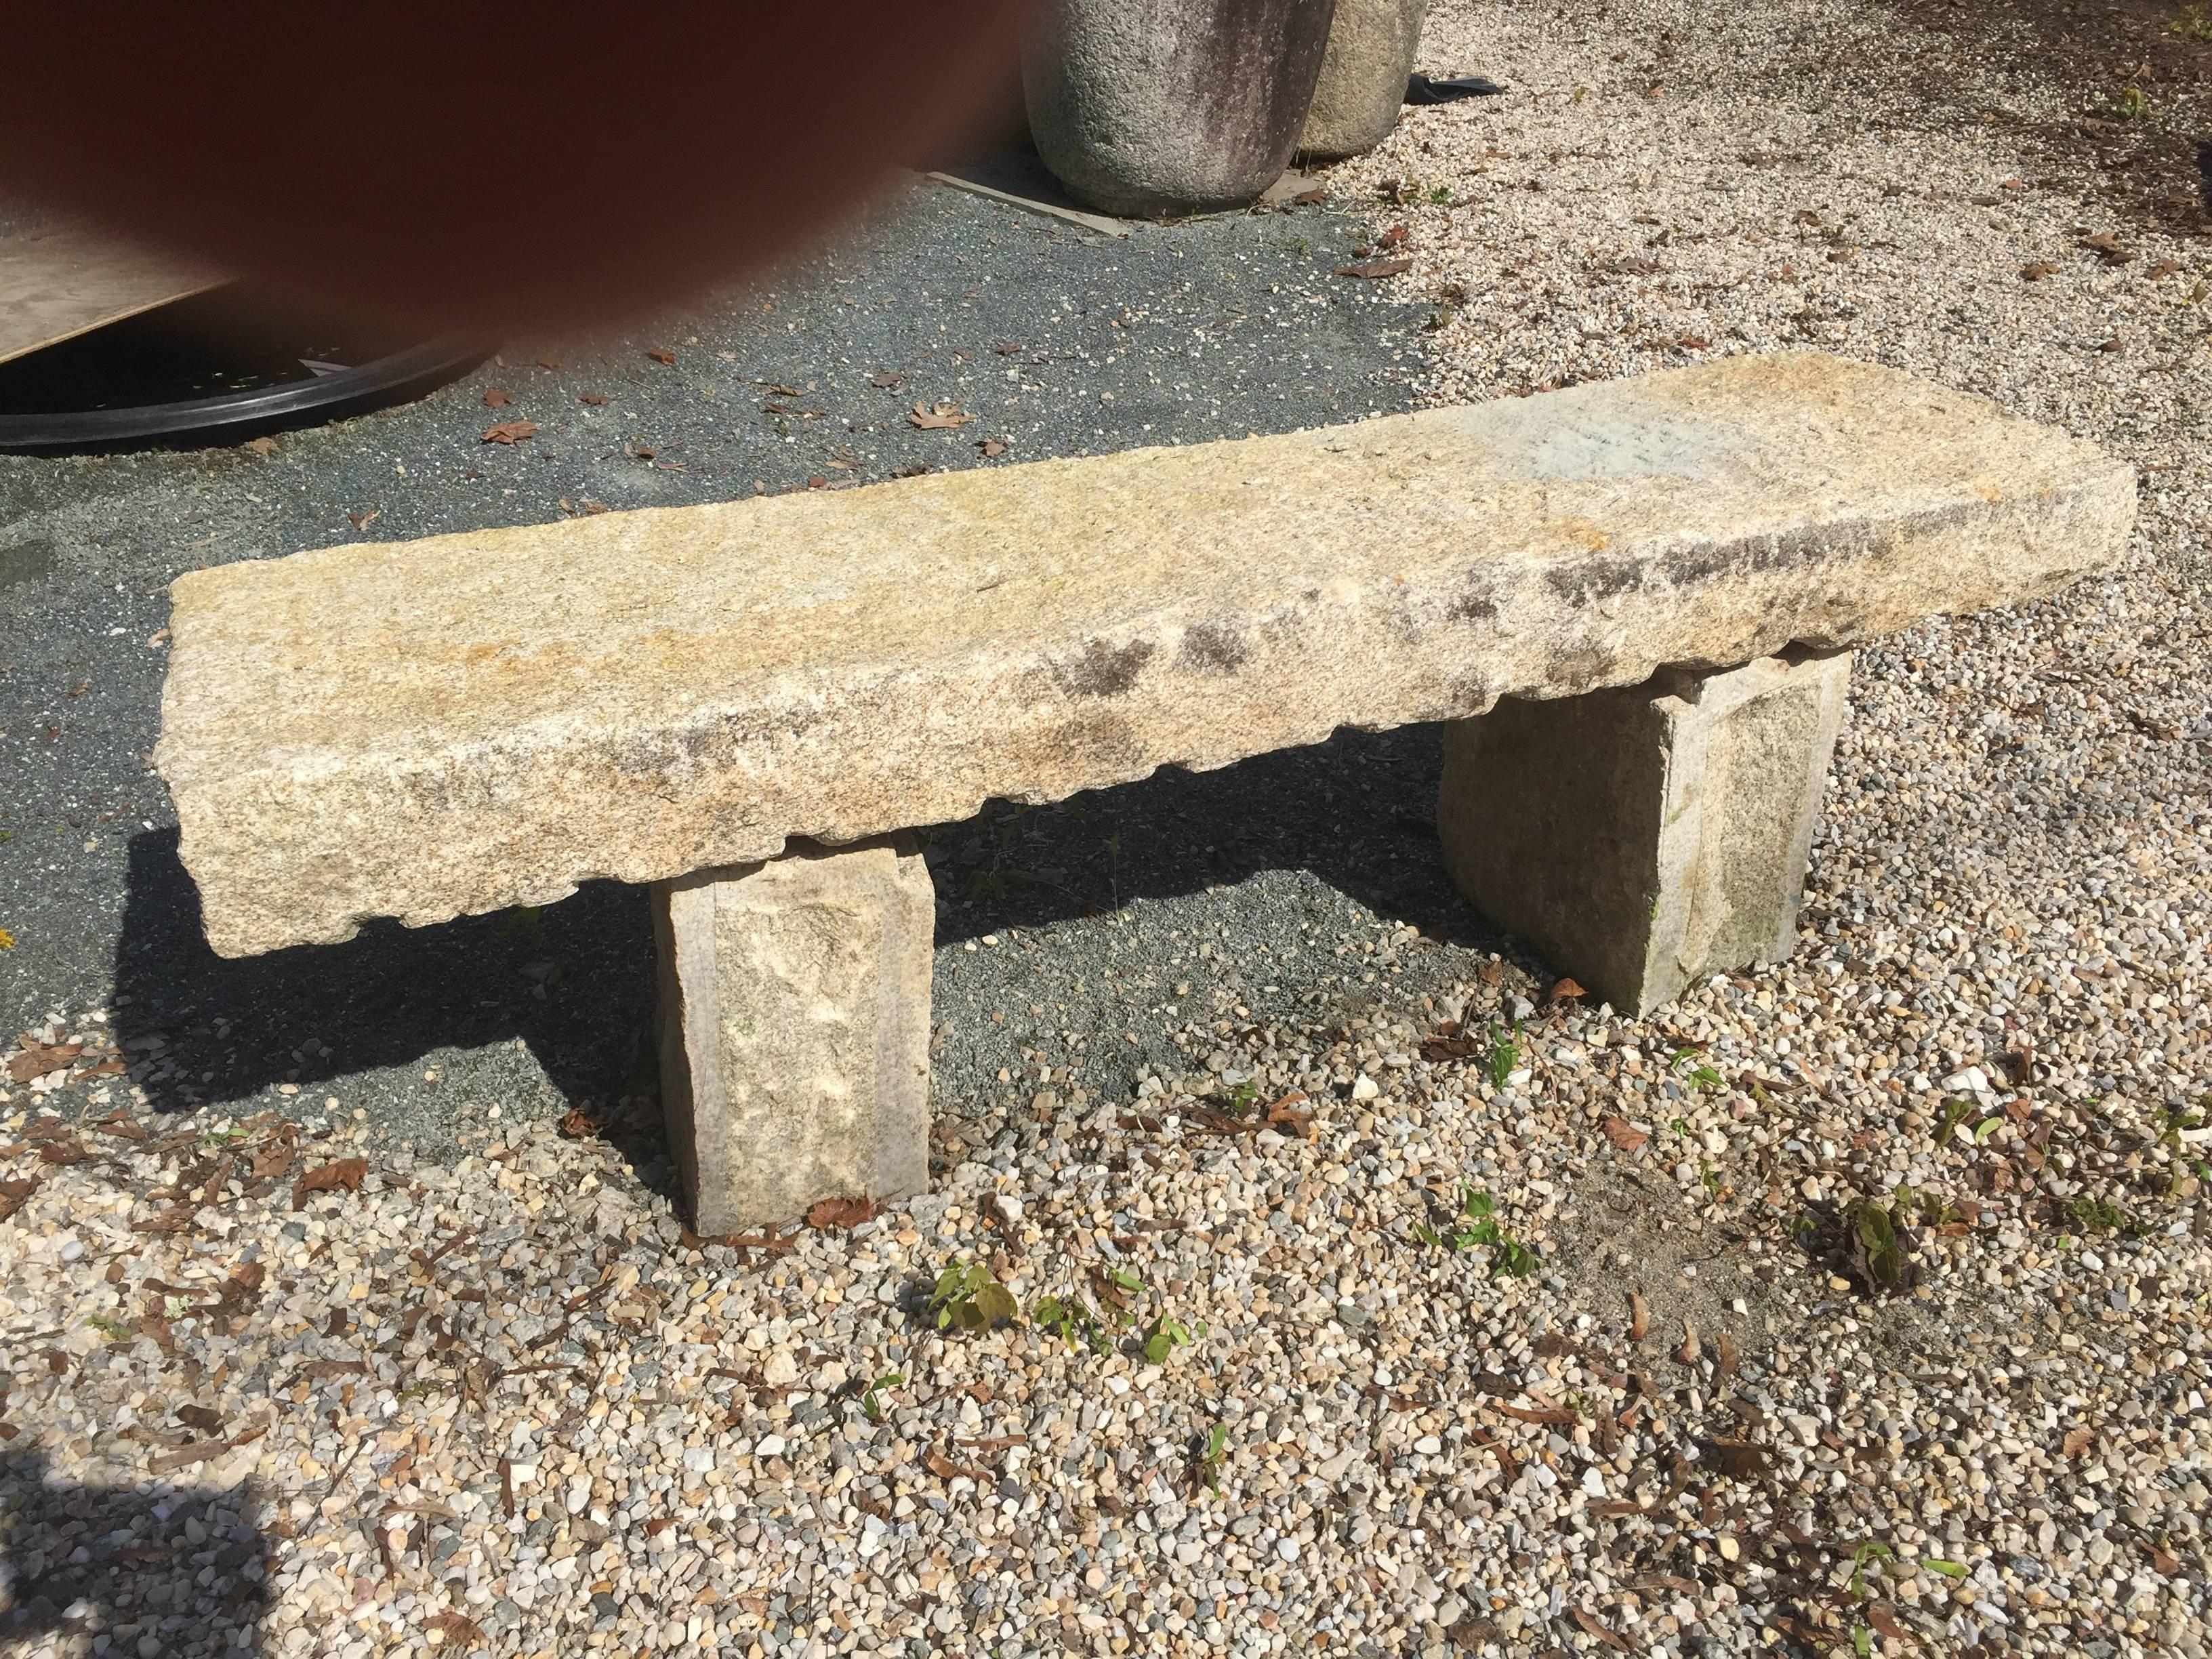 Japan, an antique hand-carved granite stone bench from an old Japanese garden. Hand-carved from solid, thick granite in three pieces with an old used patina.

Dimensions: 18 inches high and 60 inches long and 17.5 inches deep 

Age: Early 20th